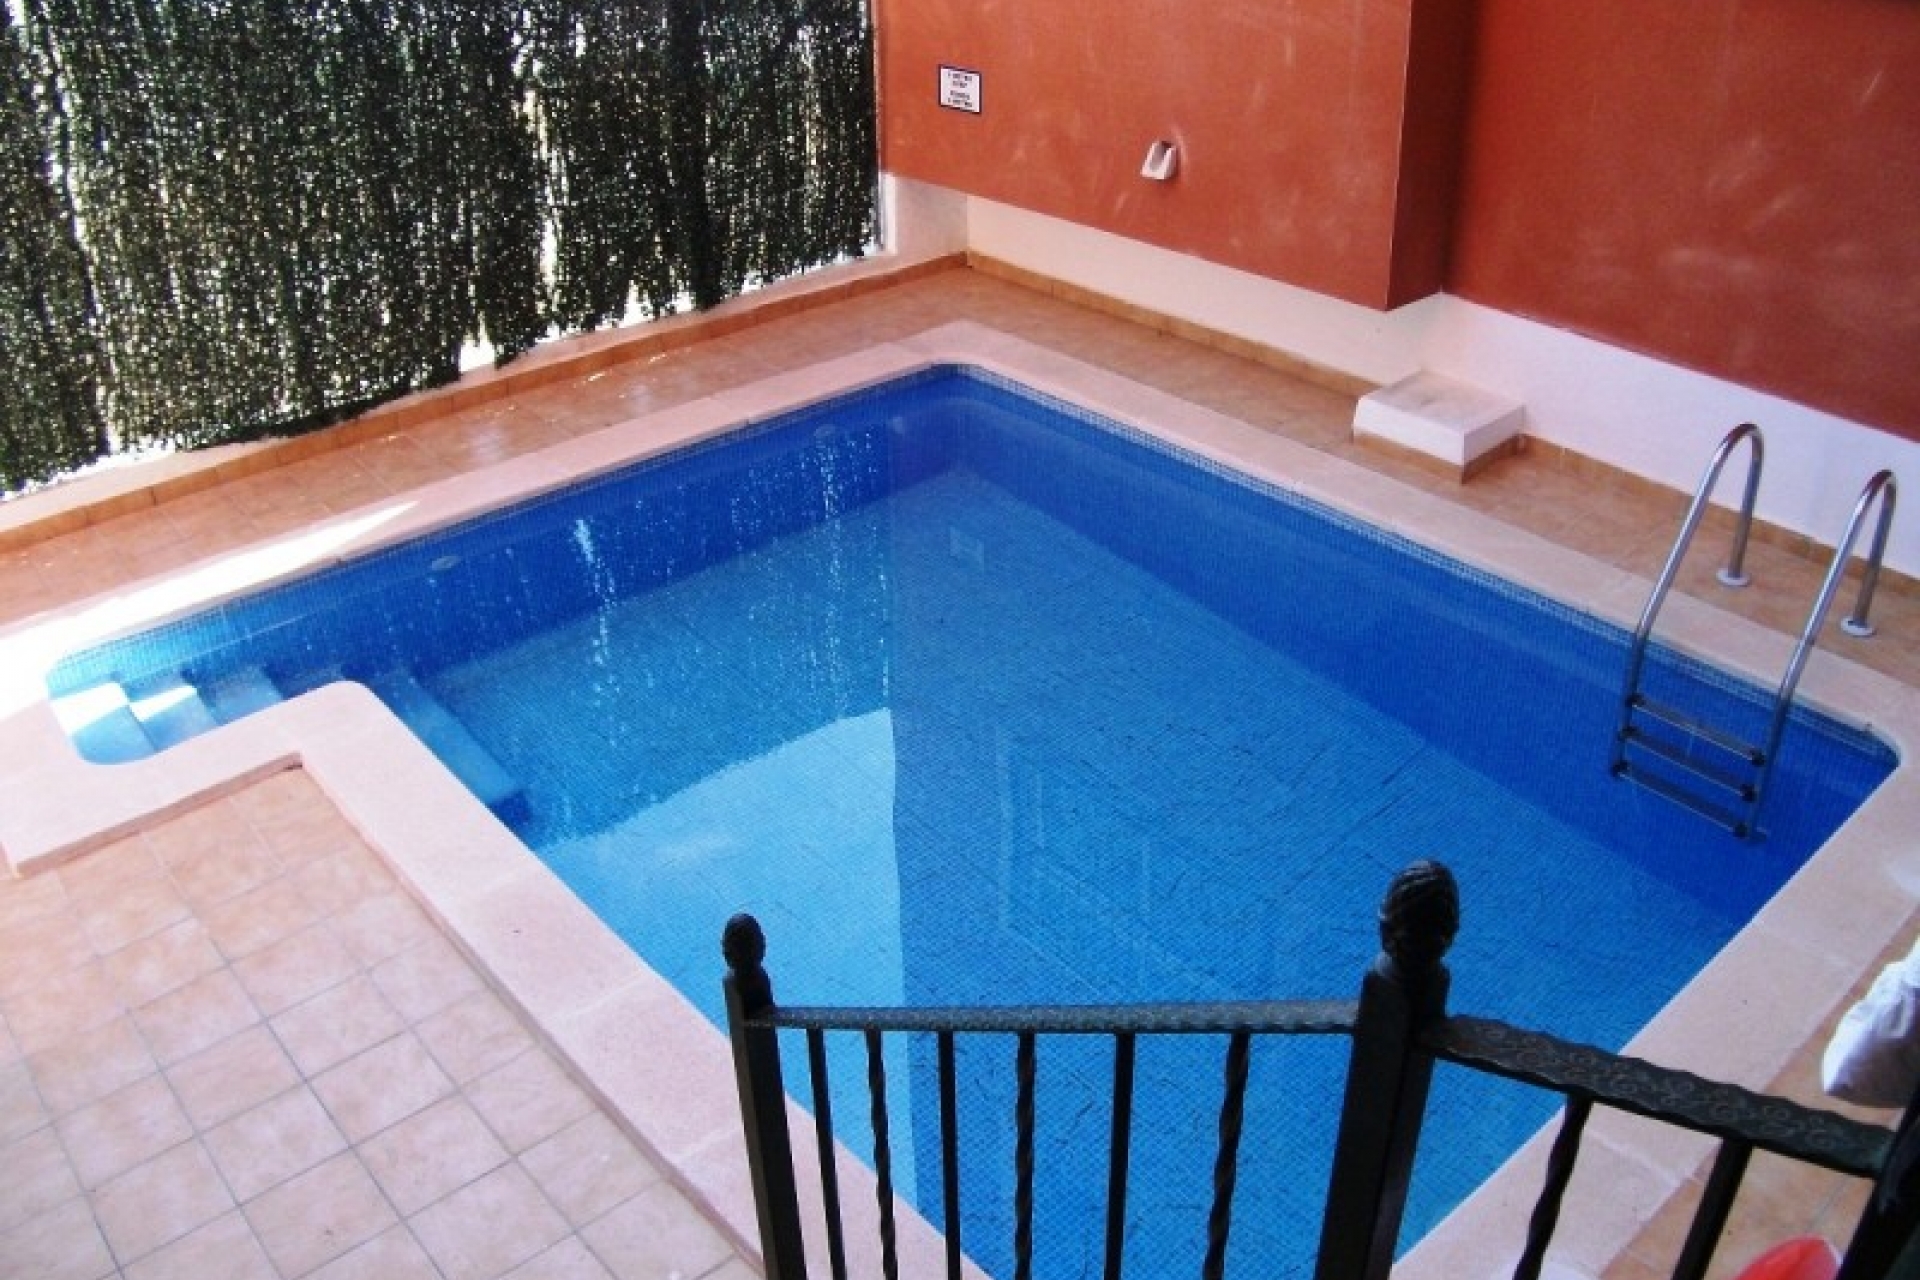 San Miguel cheap bargain property for sale, cheap property in San Miguel for sale near Torrevieja, Costa Blanca, Spain